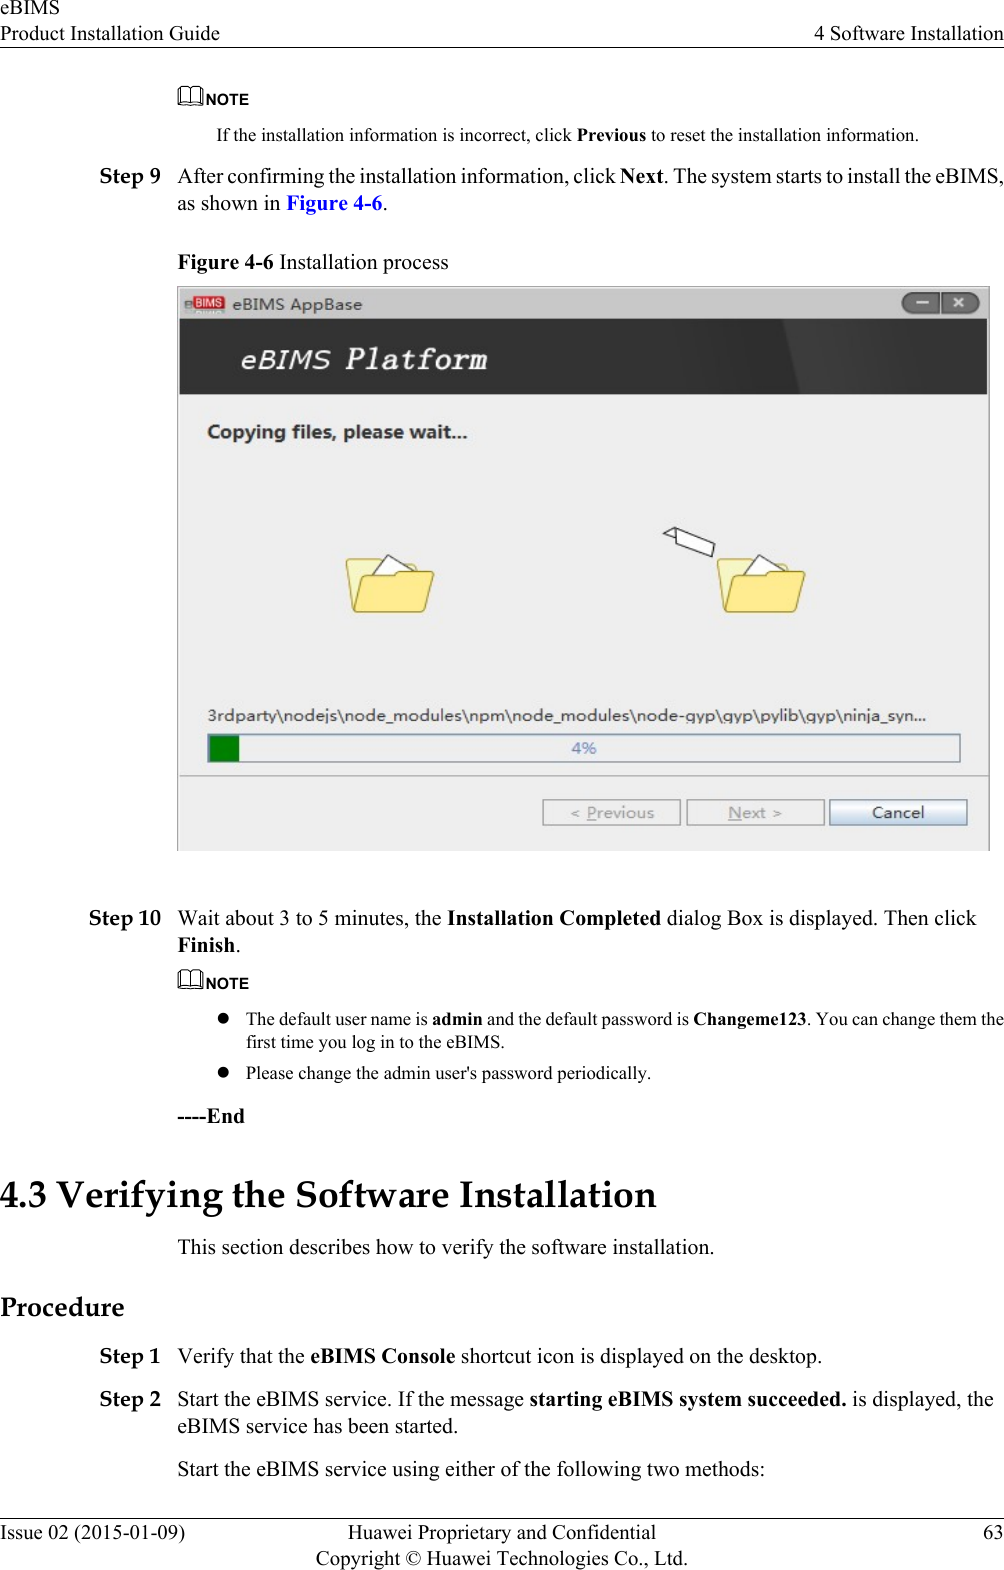 NOTEIf the installation information is incorrect, click Previous to reset the installation information.Step 9 After confirming the installation information, click Next. The system starts to install the eBIMS,as shown in Figure 4-6.Figure 4-6 Installation processStep 10 Wait about 3 to 5 minutes, the Installation Completed dialog Box is displayed. Then clickFinish.NOTElThe default user name is admin and the default password is Changeme123. You can change them thefirst time you log in to the eBIMS.lPlease change the admin user&apos;s password periodically.----End4.3 Verifying the Software InstallationThis section describes how to verify the software installation.ProcedureStep 1 Verify that the eBIMS Console shortcut icon is displayed on the desktop.Step 2 Start the eBIMS service. If the message starting eBIMS system succeeded. is displayed, theeBIMS service has been started.Start the eBIMS service using either of the following two methods:eBIMSProduct Installation Guide 4 Software InstallationIssue 02 (2015-01-09) Huawei Proprietary and ConfidentialCopyright © Huawei Technologies Co., Ltd.63